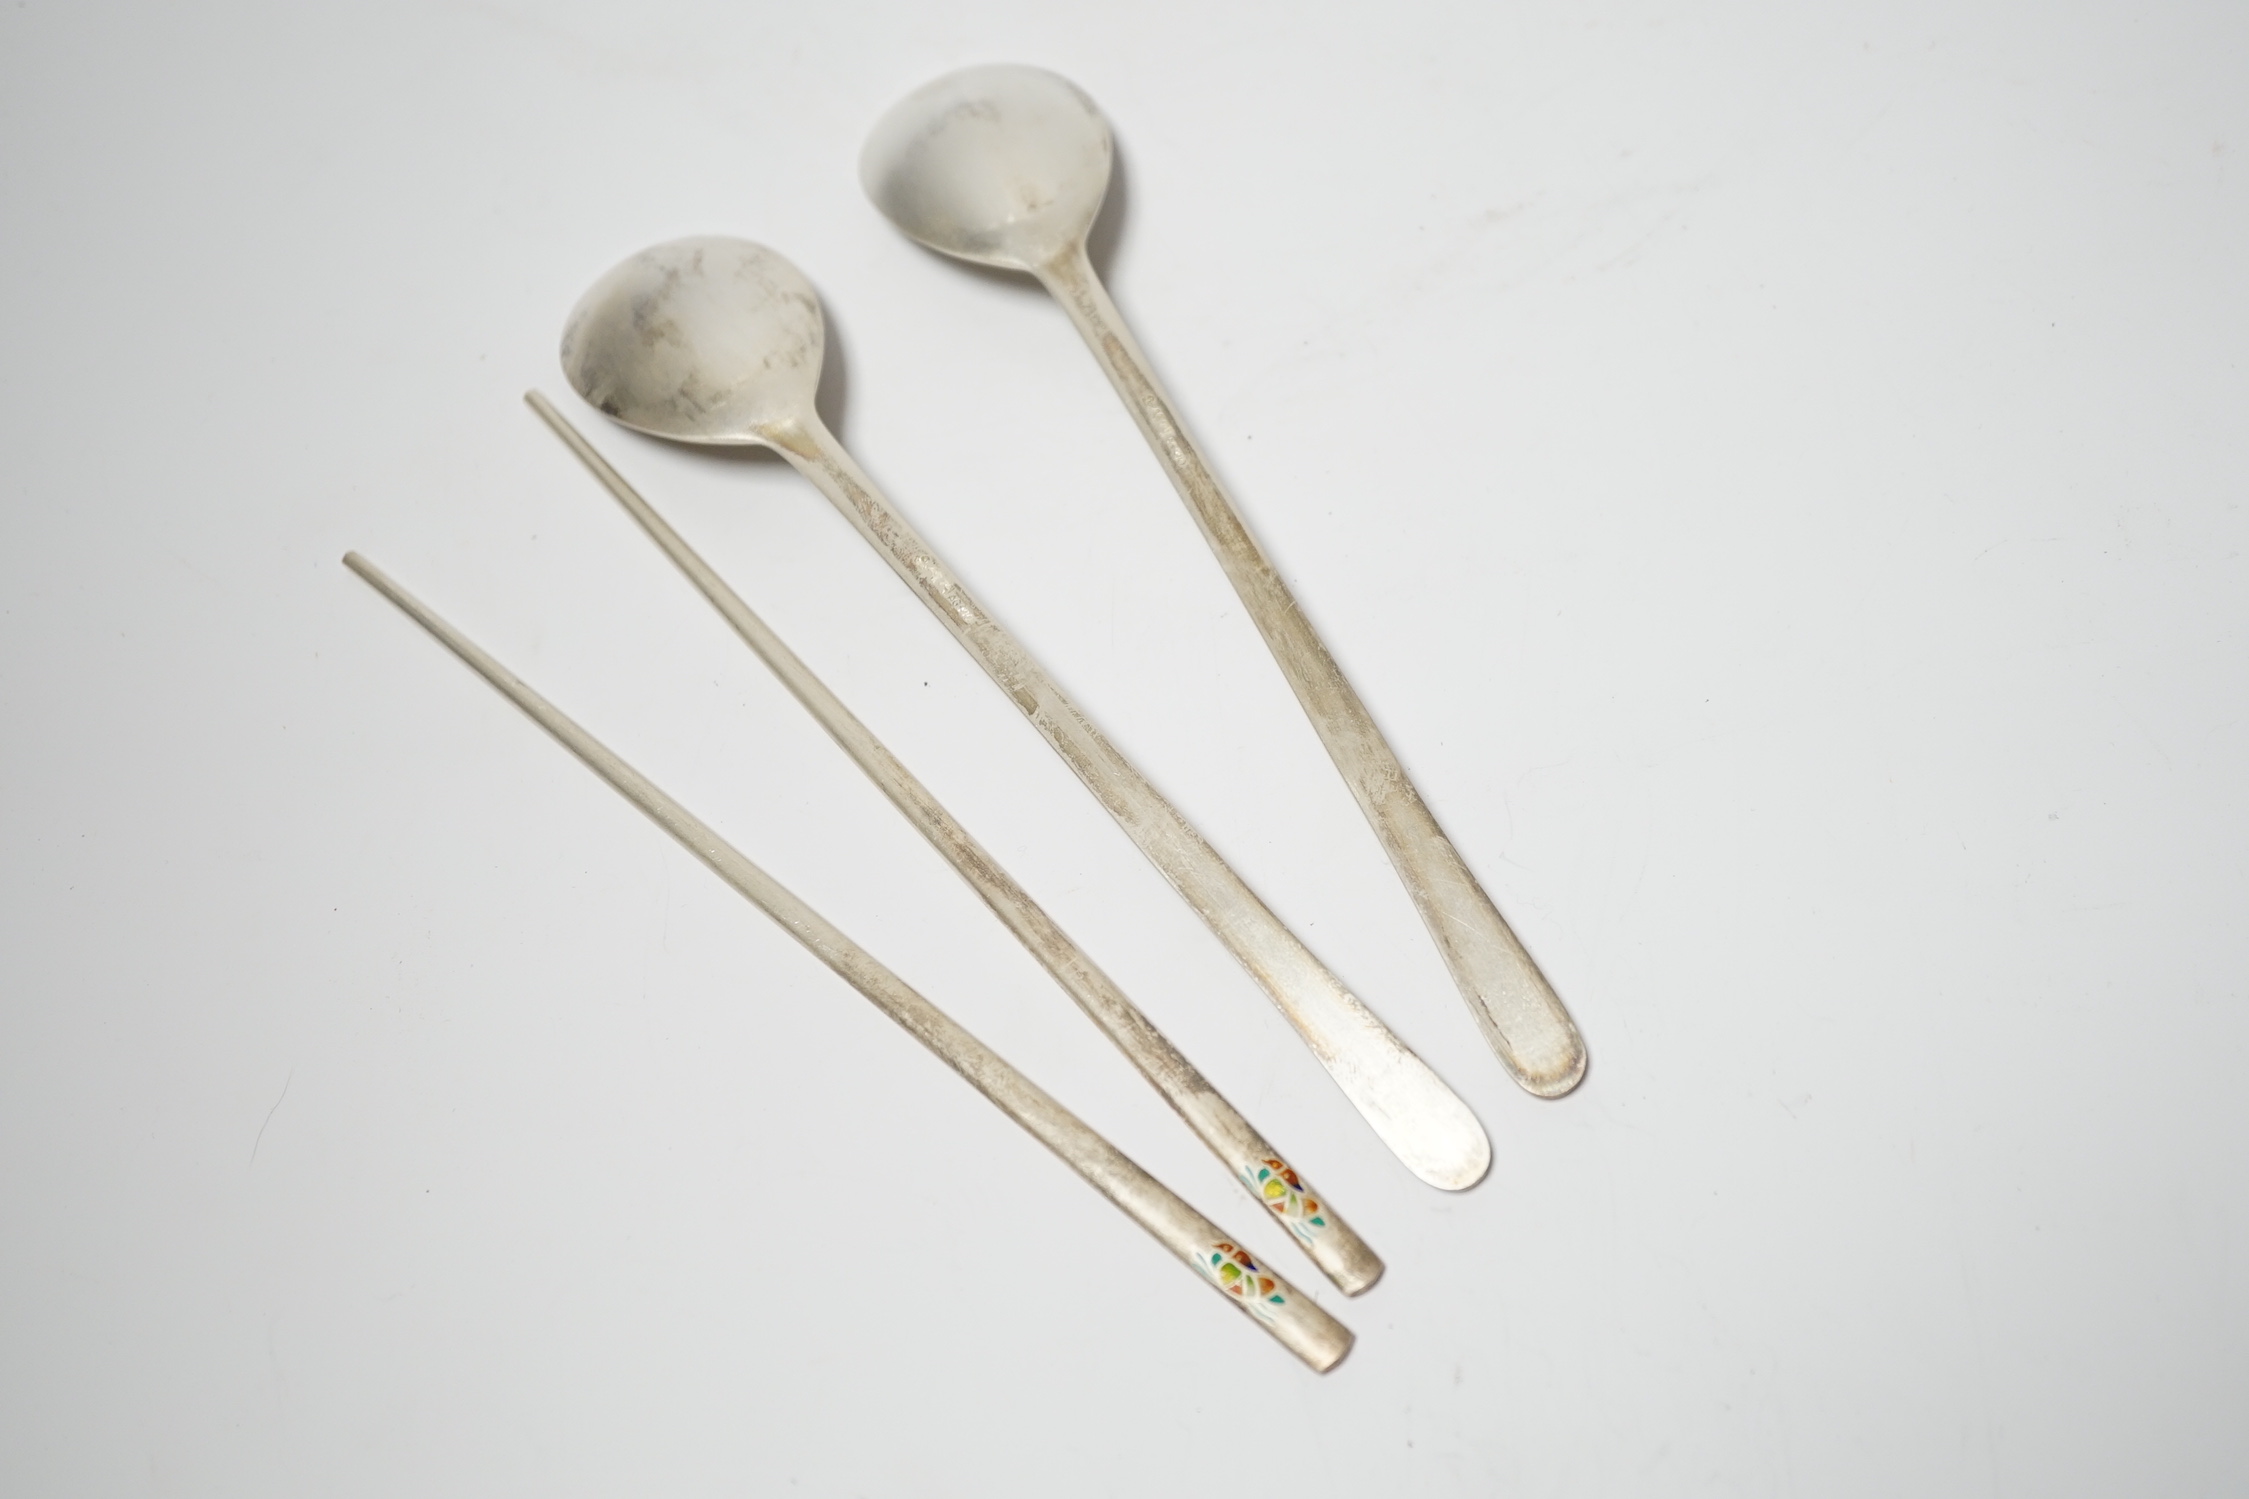 A Korean 990 standard white metal pair of chopsticks, 20cm and two matching spoons with enamelled decoration.